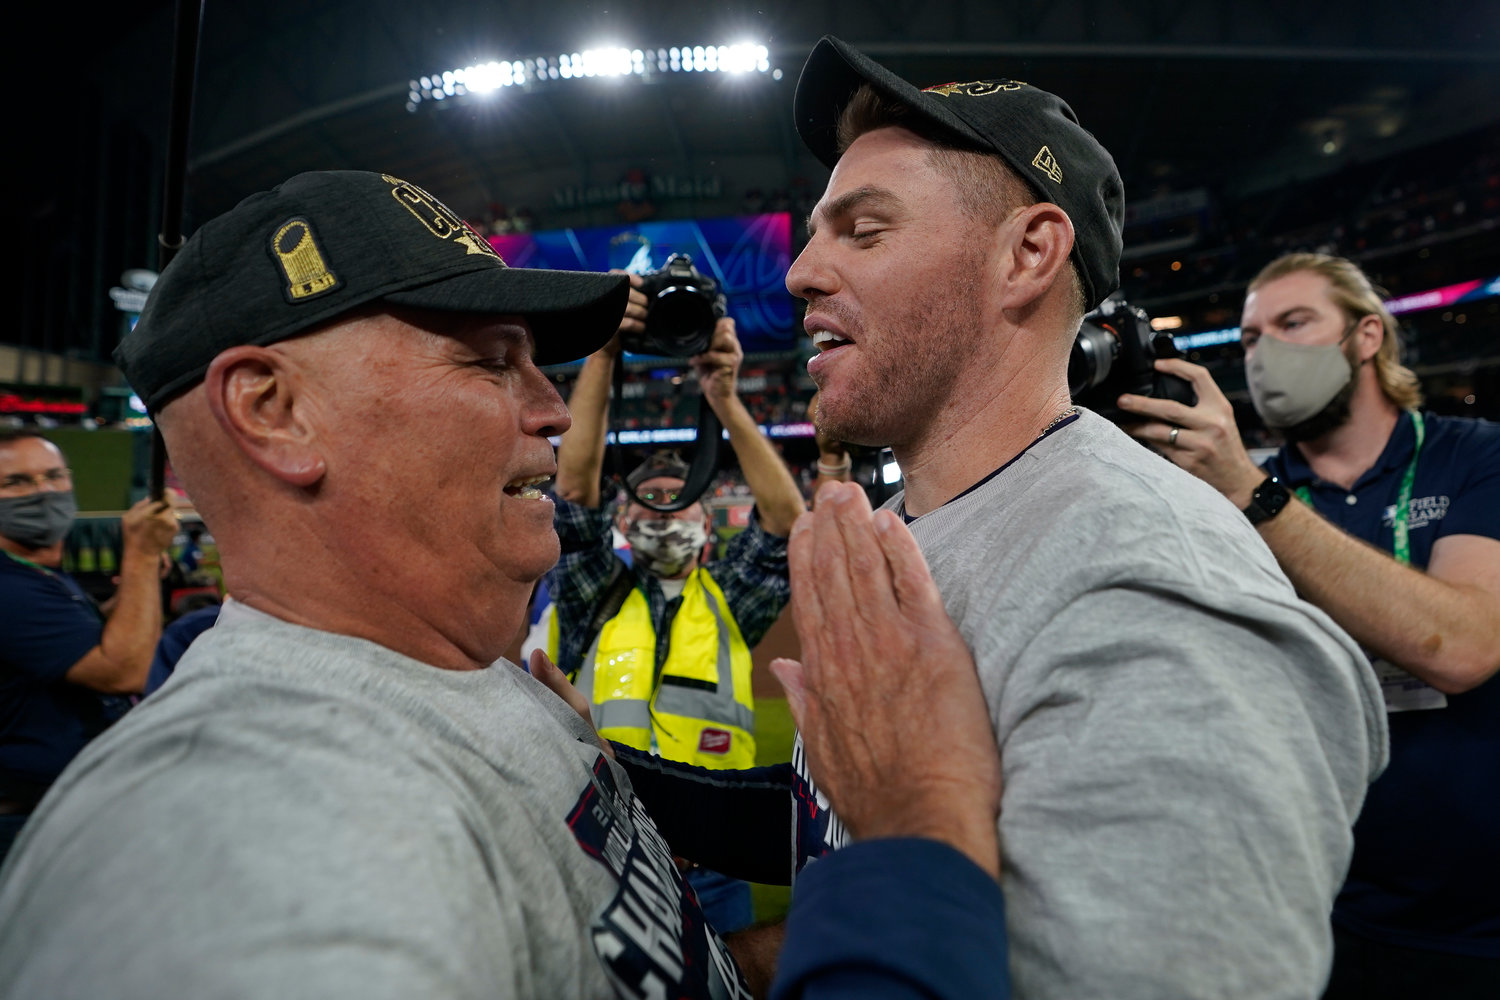 Atlanta Braves manager Brian Snitker and first baseman Freddie Freeman celebrate after winning baseball’s World Series in Game 6 against the Houston Astros Tuesday, Nov. 2, 2021, in Houston. The Braves won 7-0. (AP Photo/David J. Phillip)